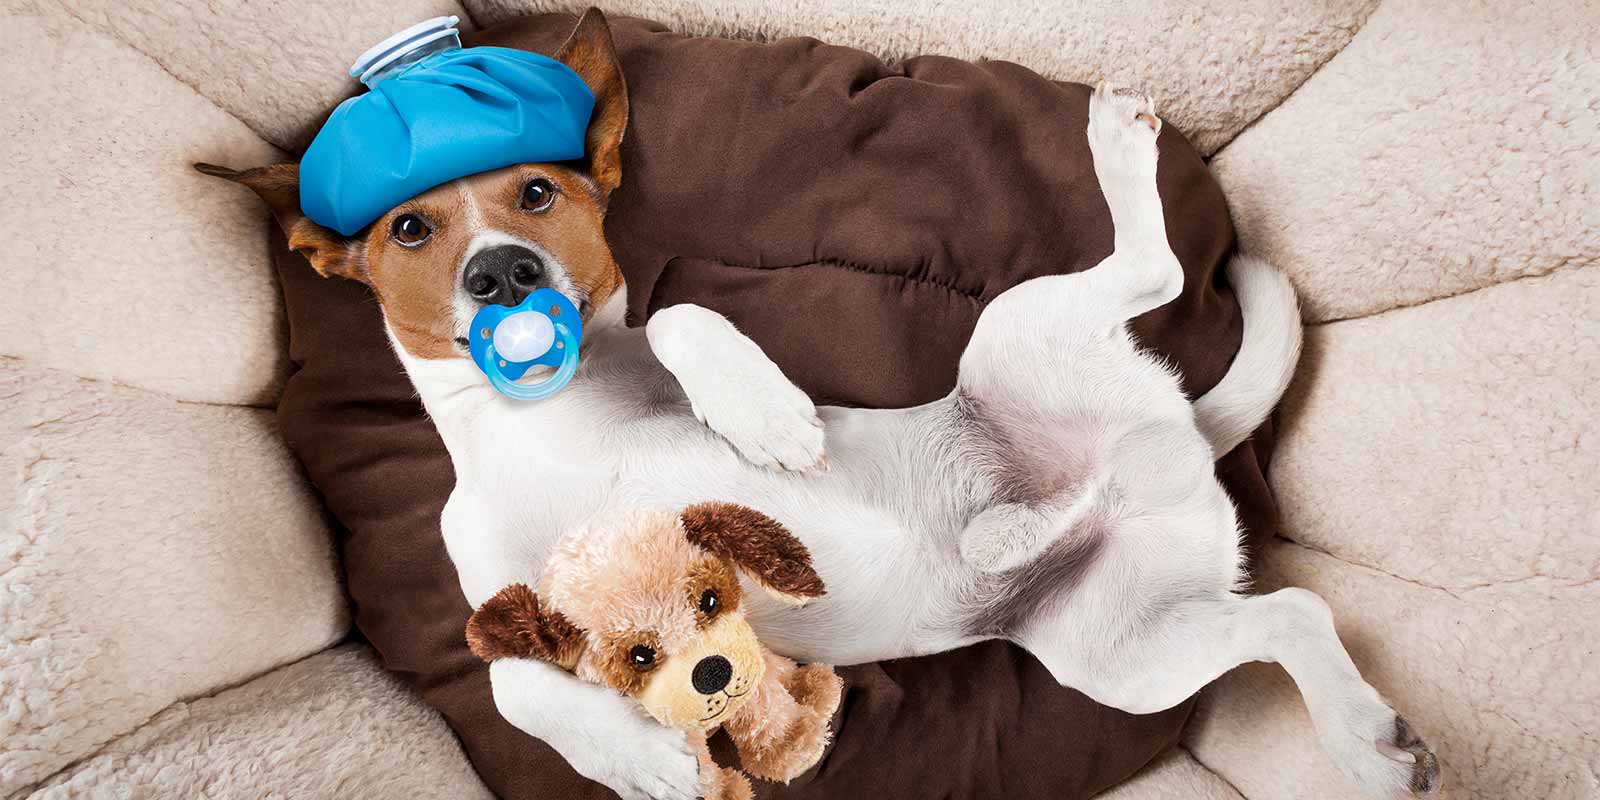 dog with a teddy bear and ice pack on his head laying down